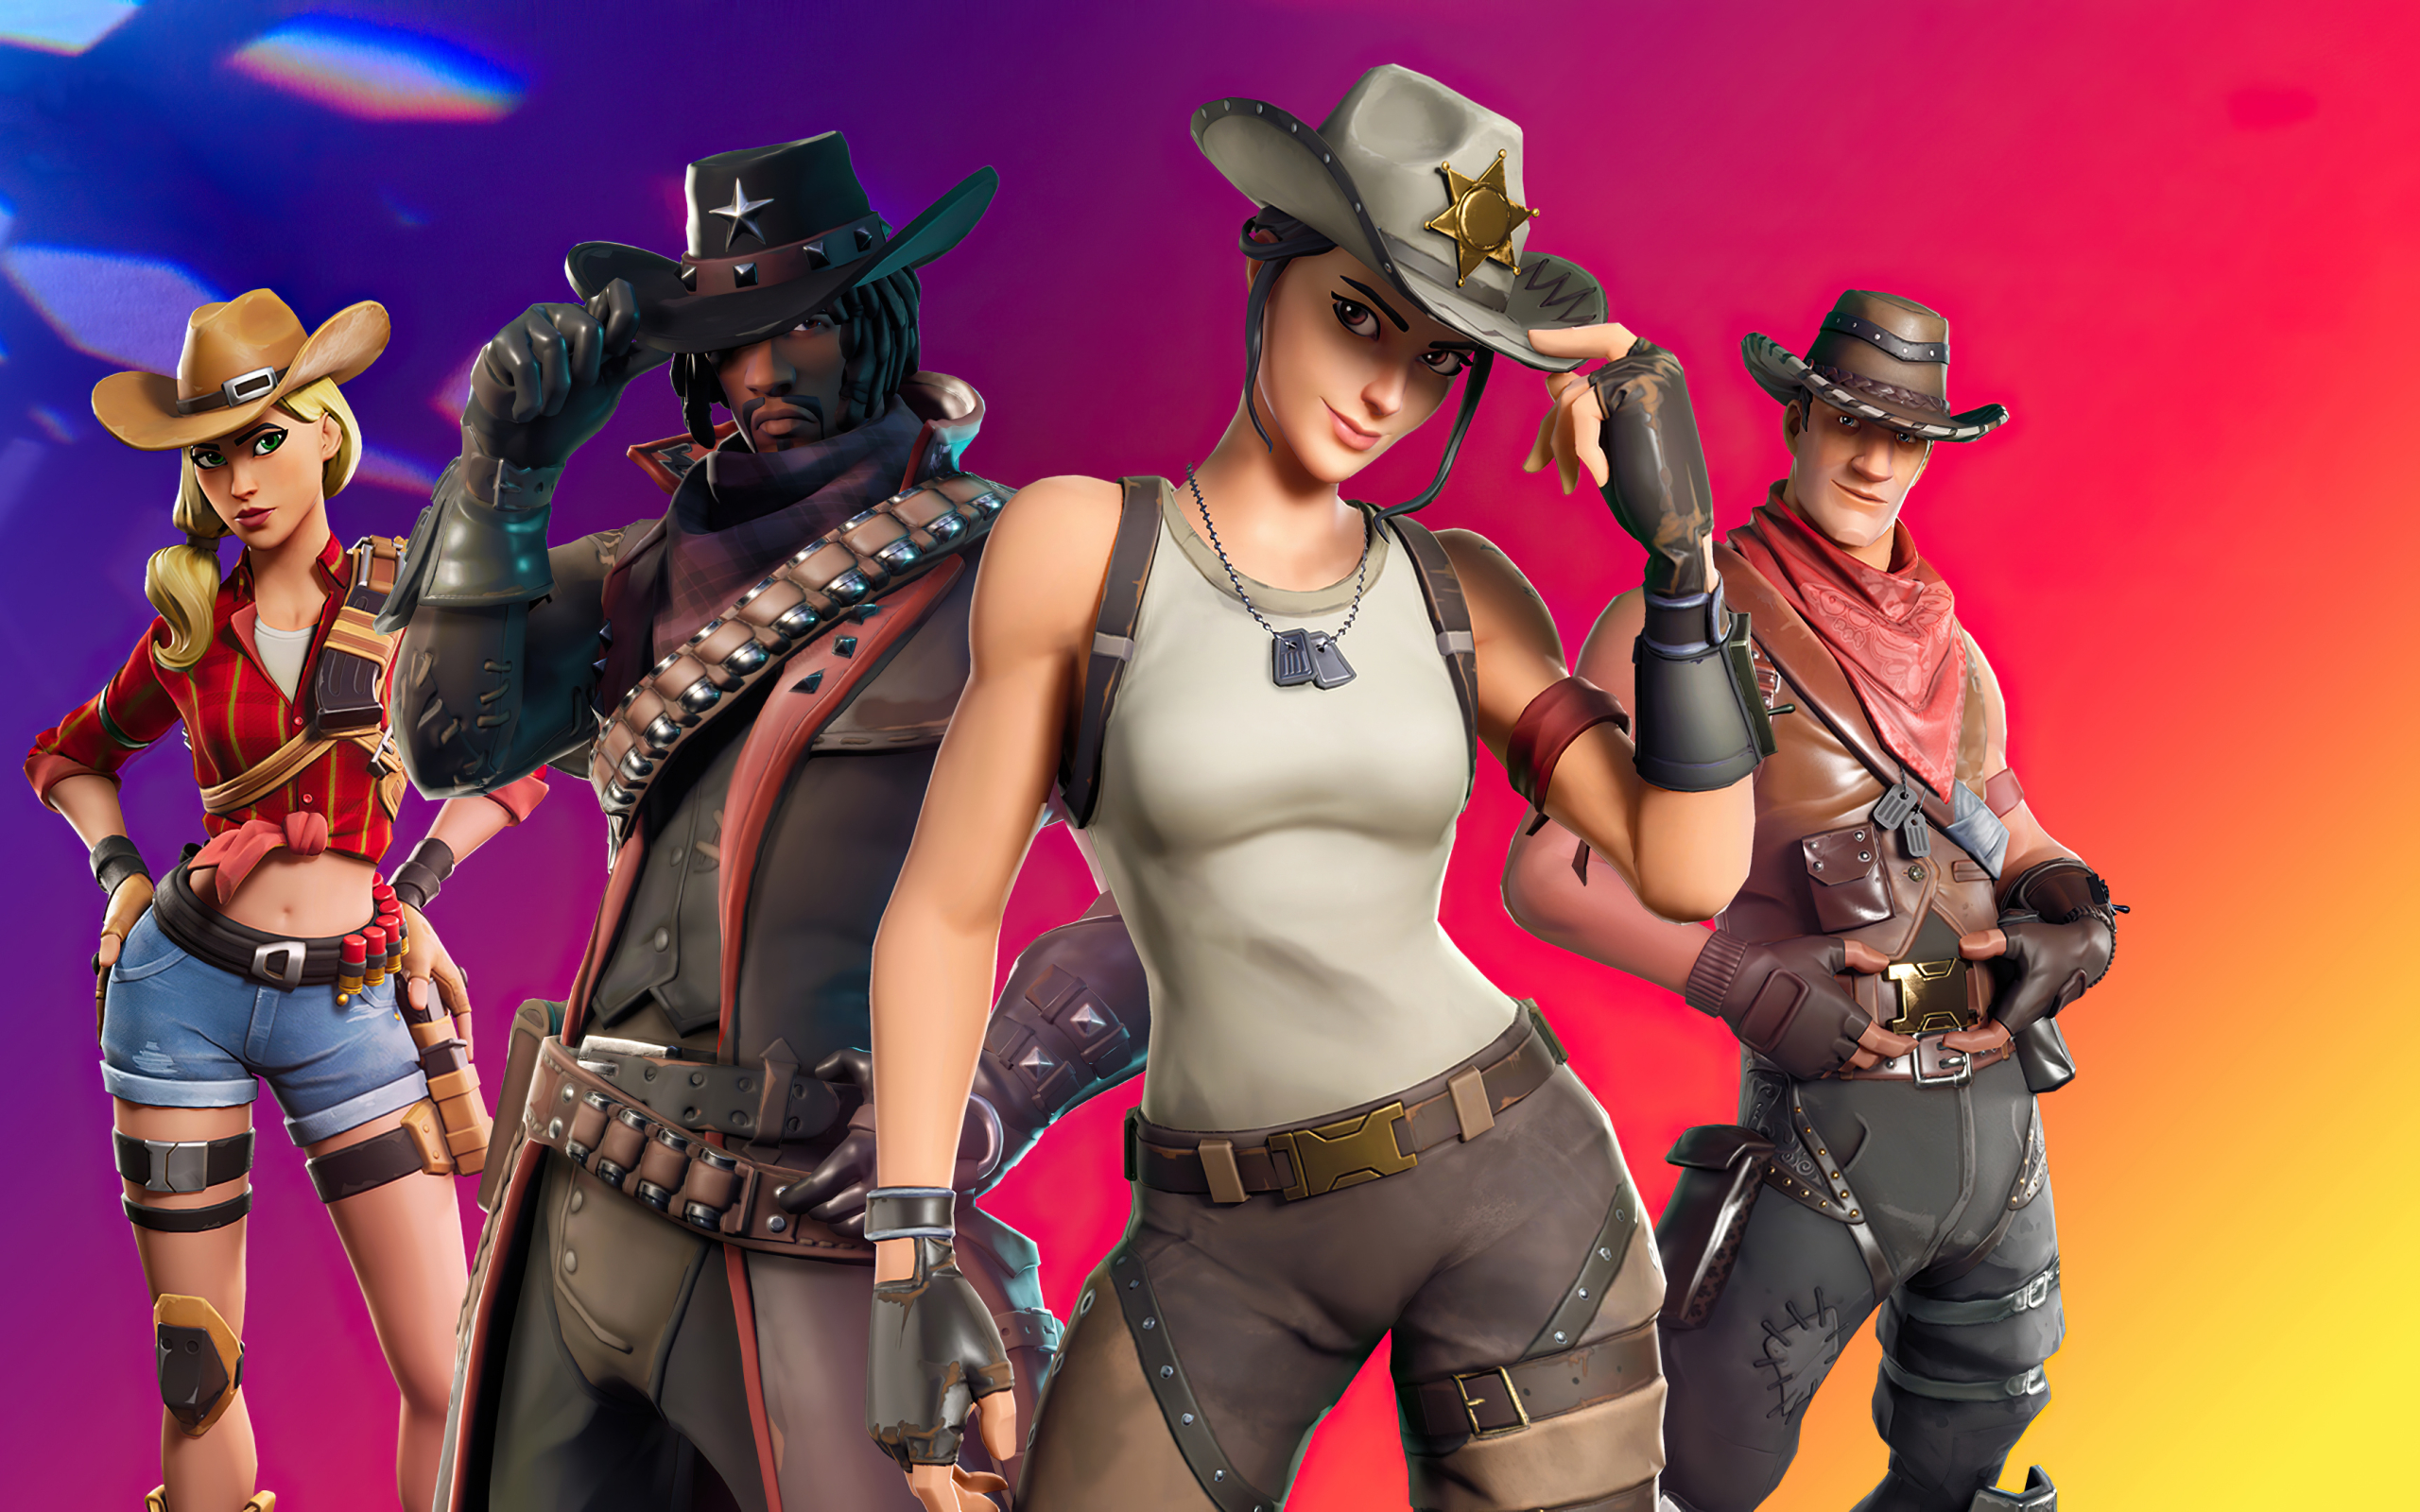 fortnite for pc download free